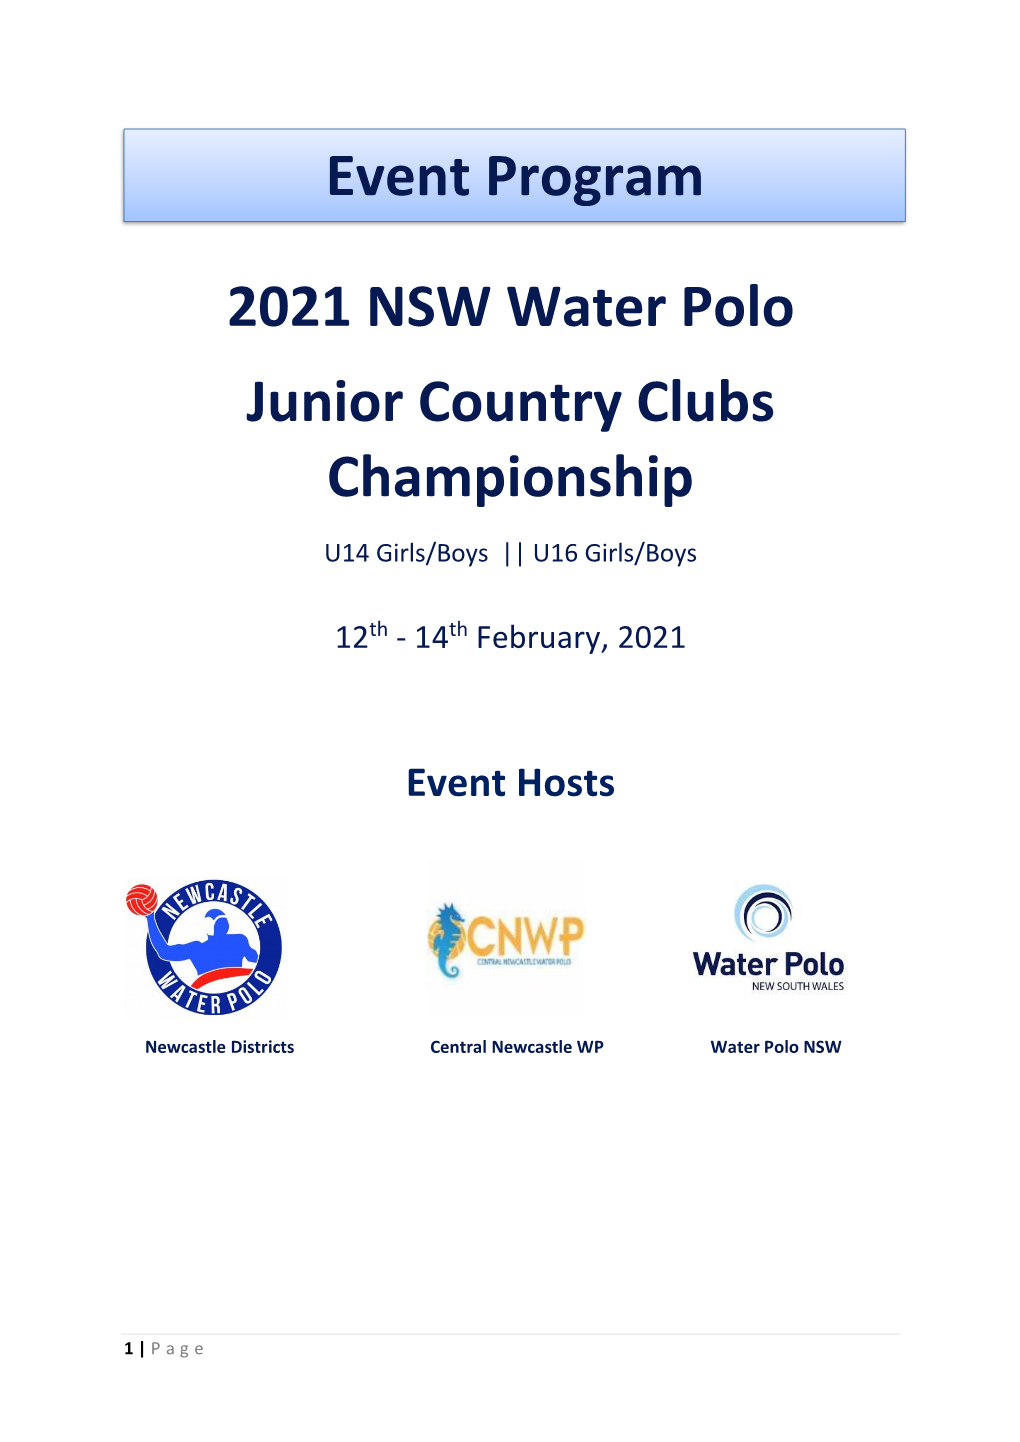 2021 NSW Water Polo Junior Country Clubs Championship